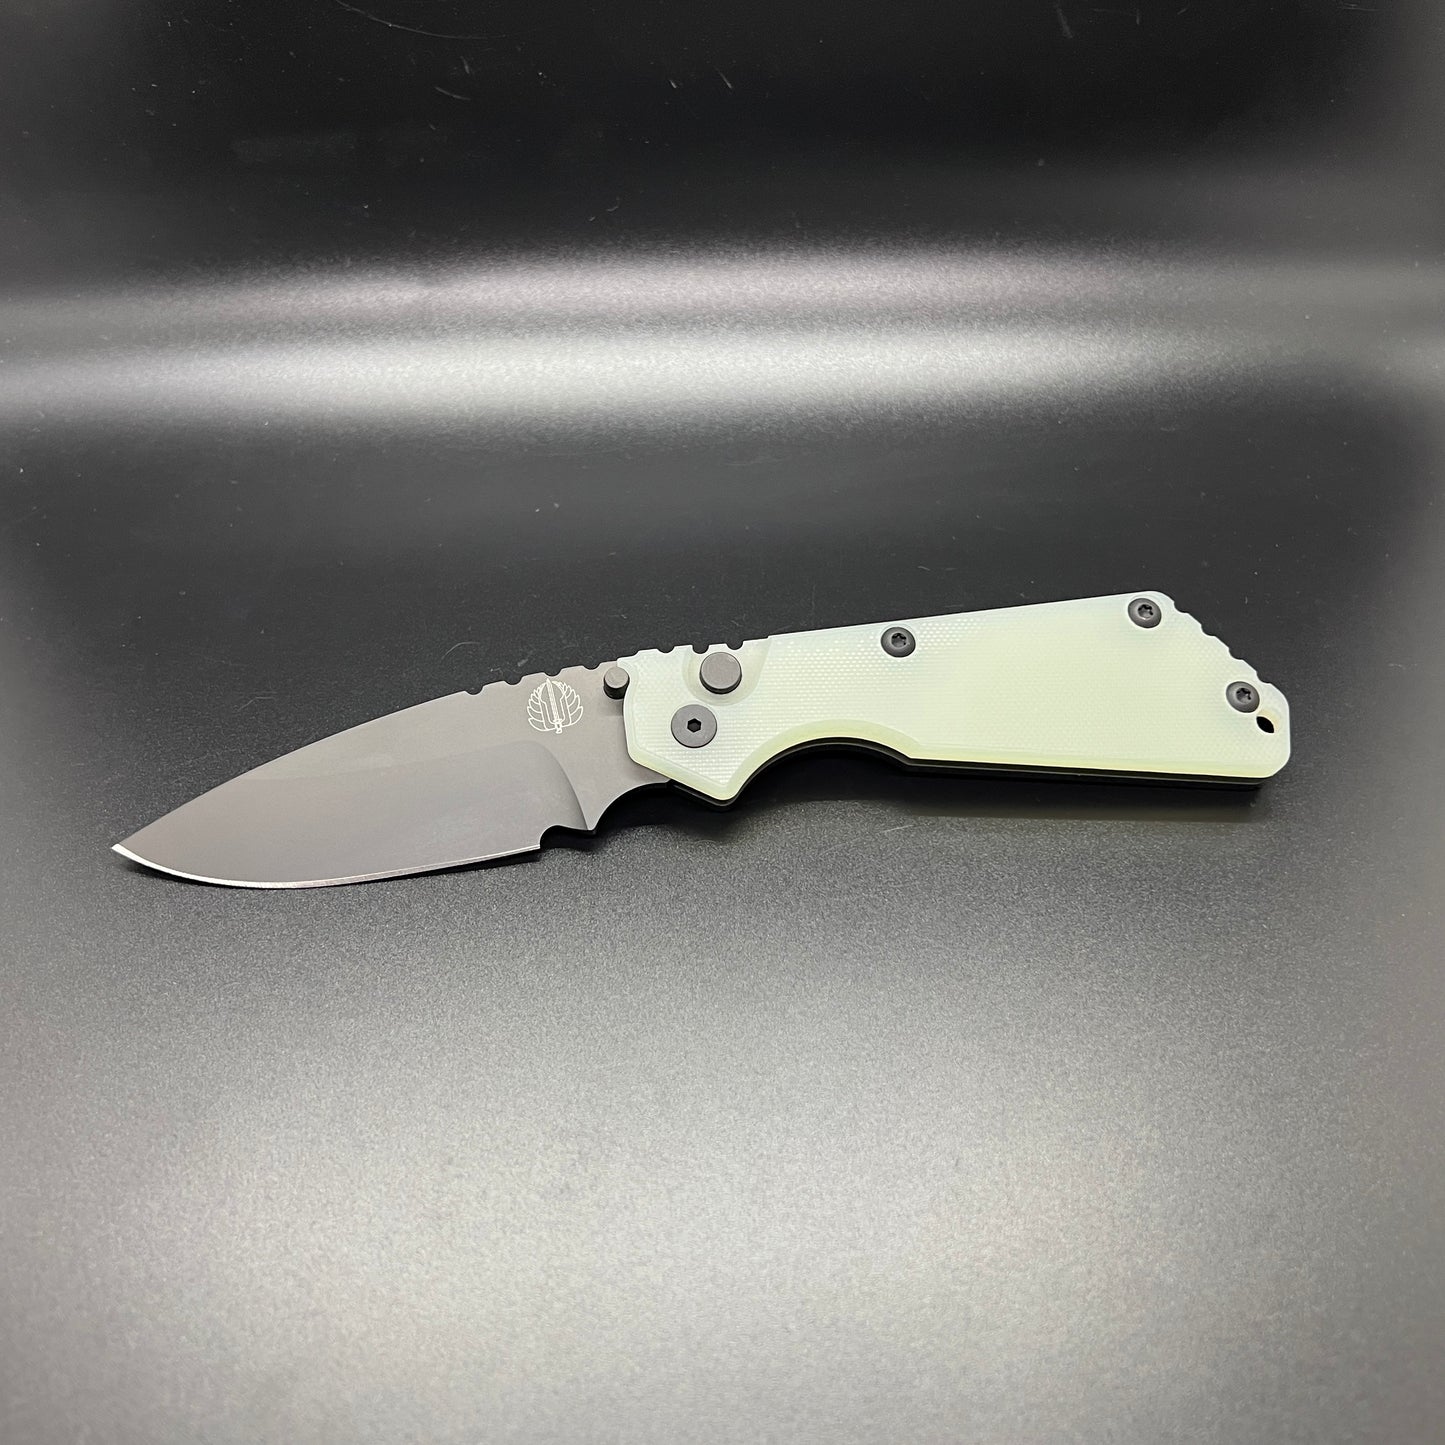 Strider + Pro-Tech Exclusive SnG Automatic